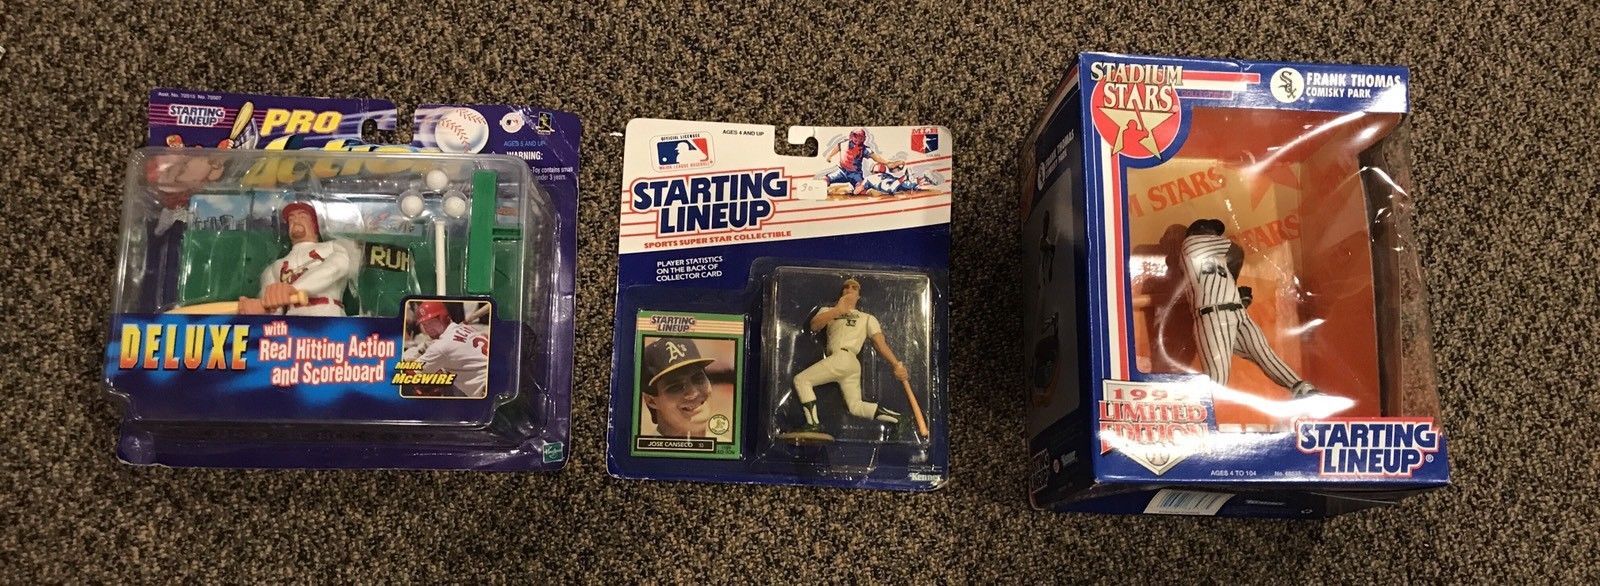 Wholesale Lot MLB Starting Lineup Figures NIP - Canseco - McGwire - Frank Thomas